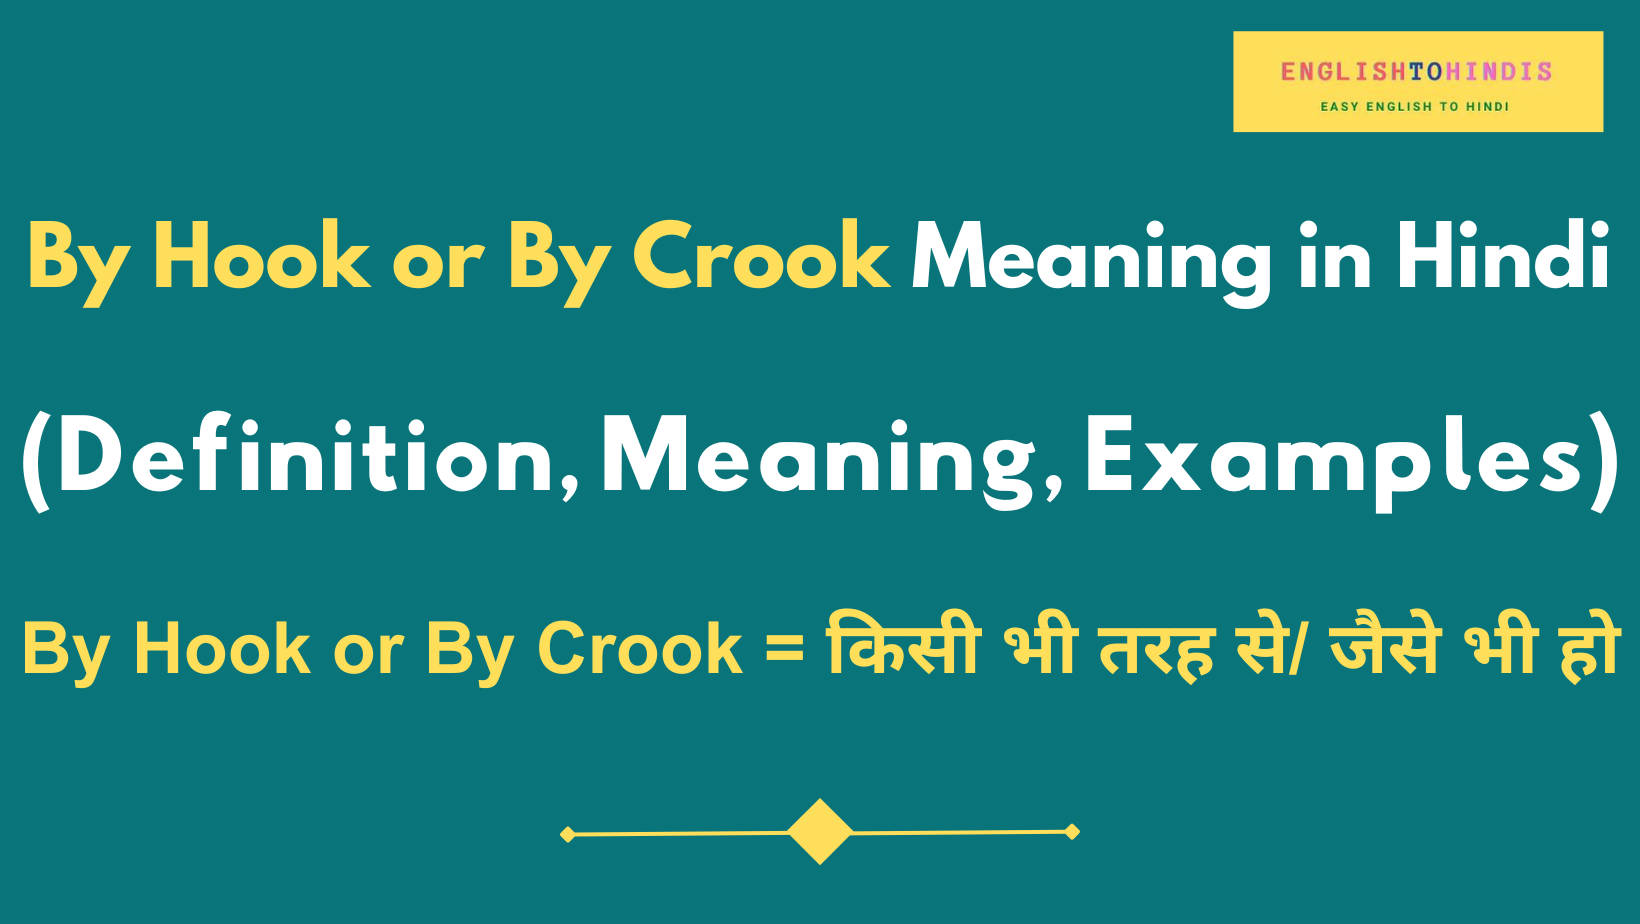 By Hook or By Crook Meaning in Hindi